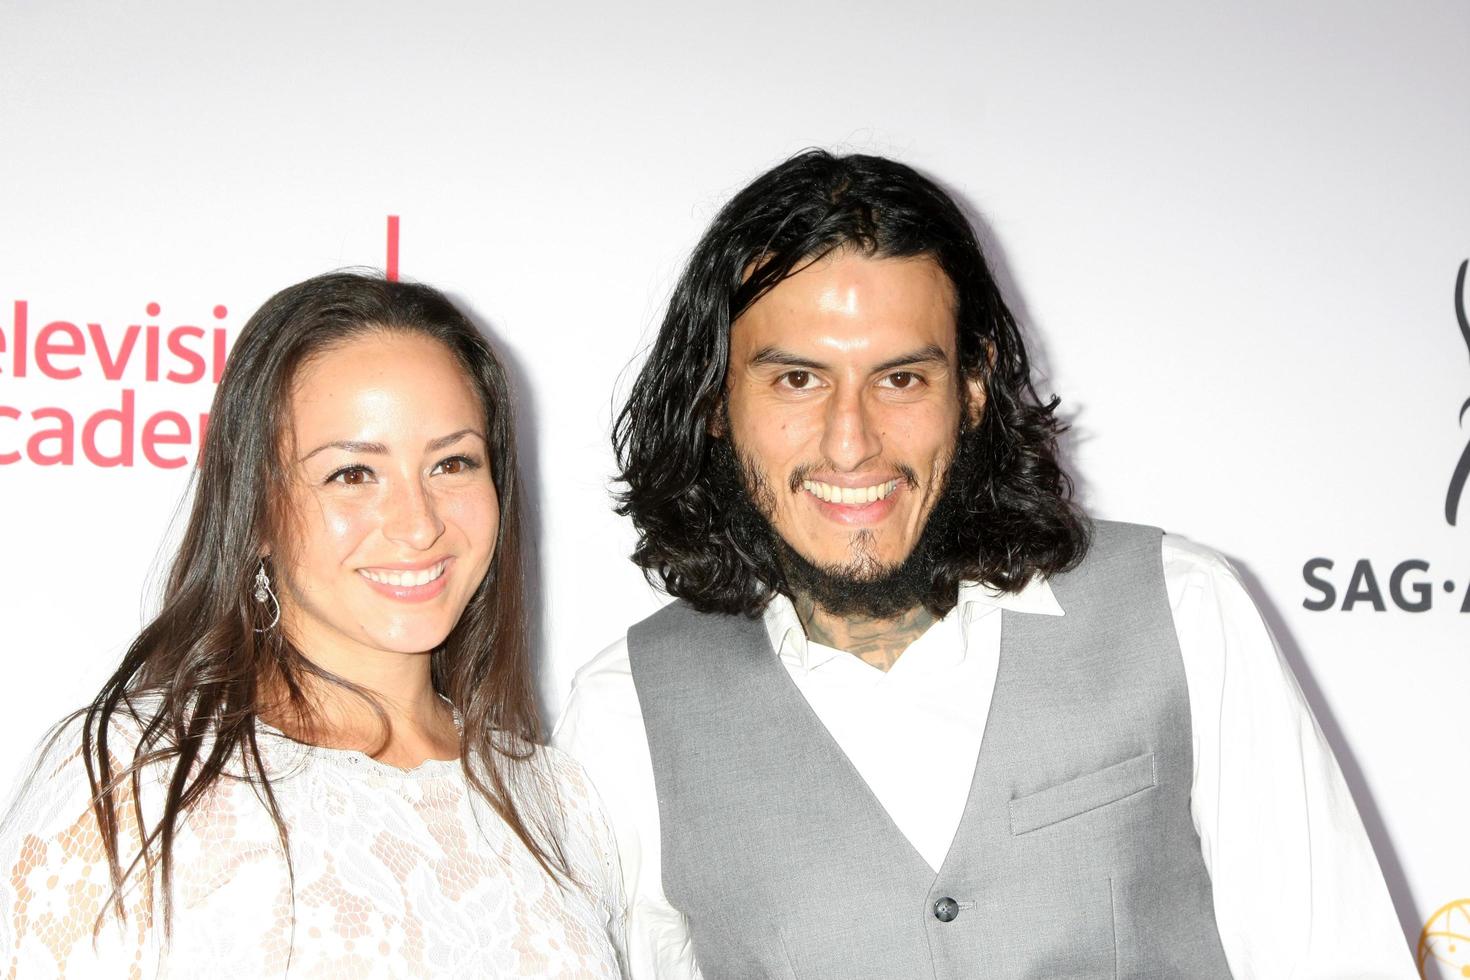 LOS ANGELES, AUG 27 - Richard Cabral at the Dynamic and Diverse Emmy Celebration at the Montage Hotel on August 27, 2015 in Beverly Hills, CA photo